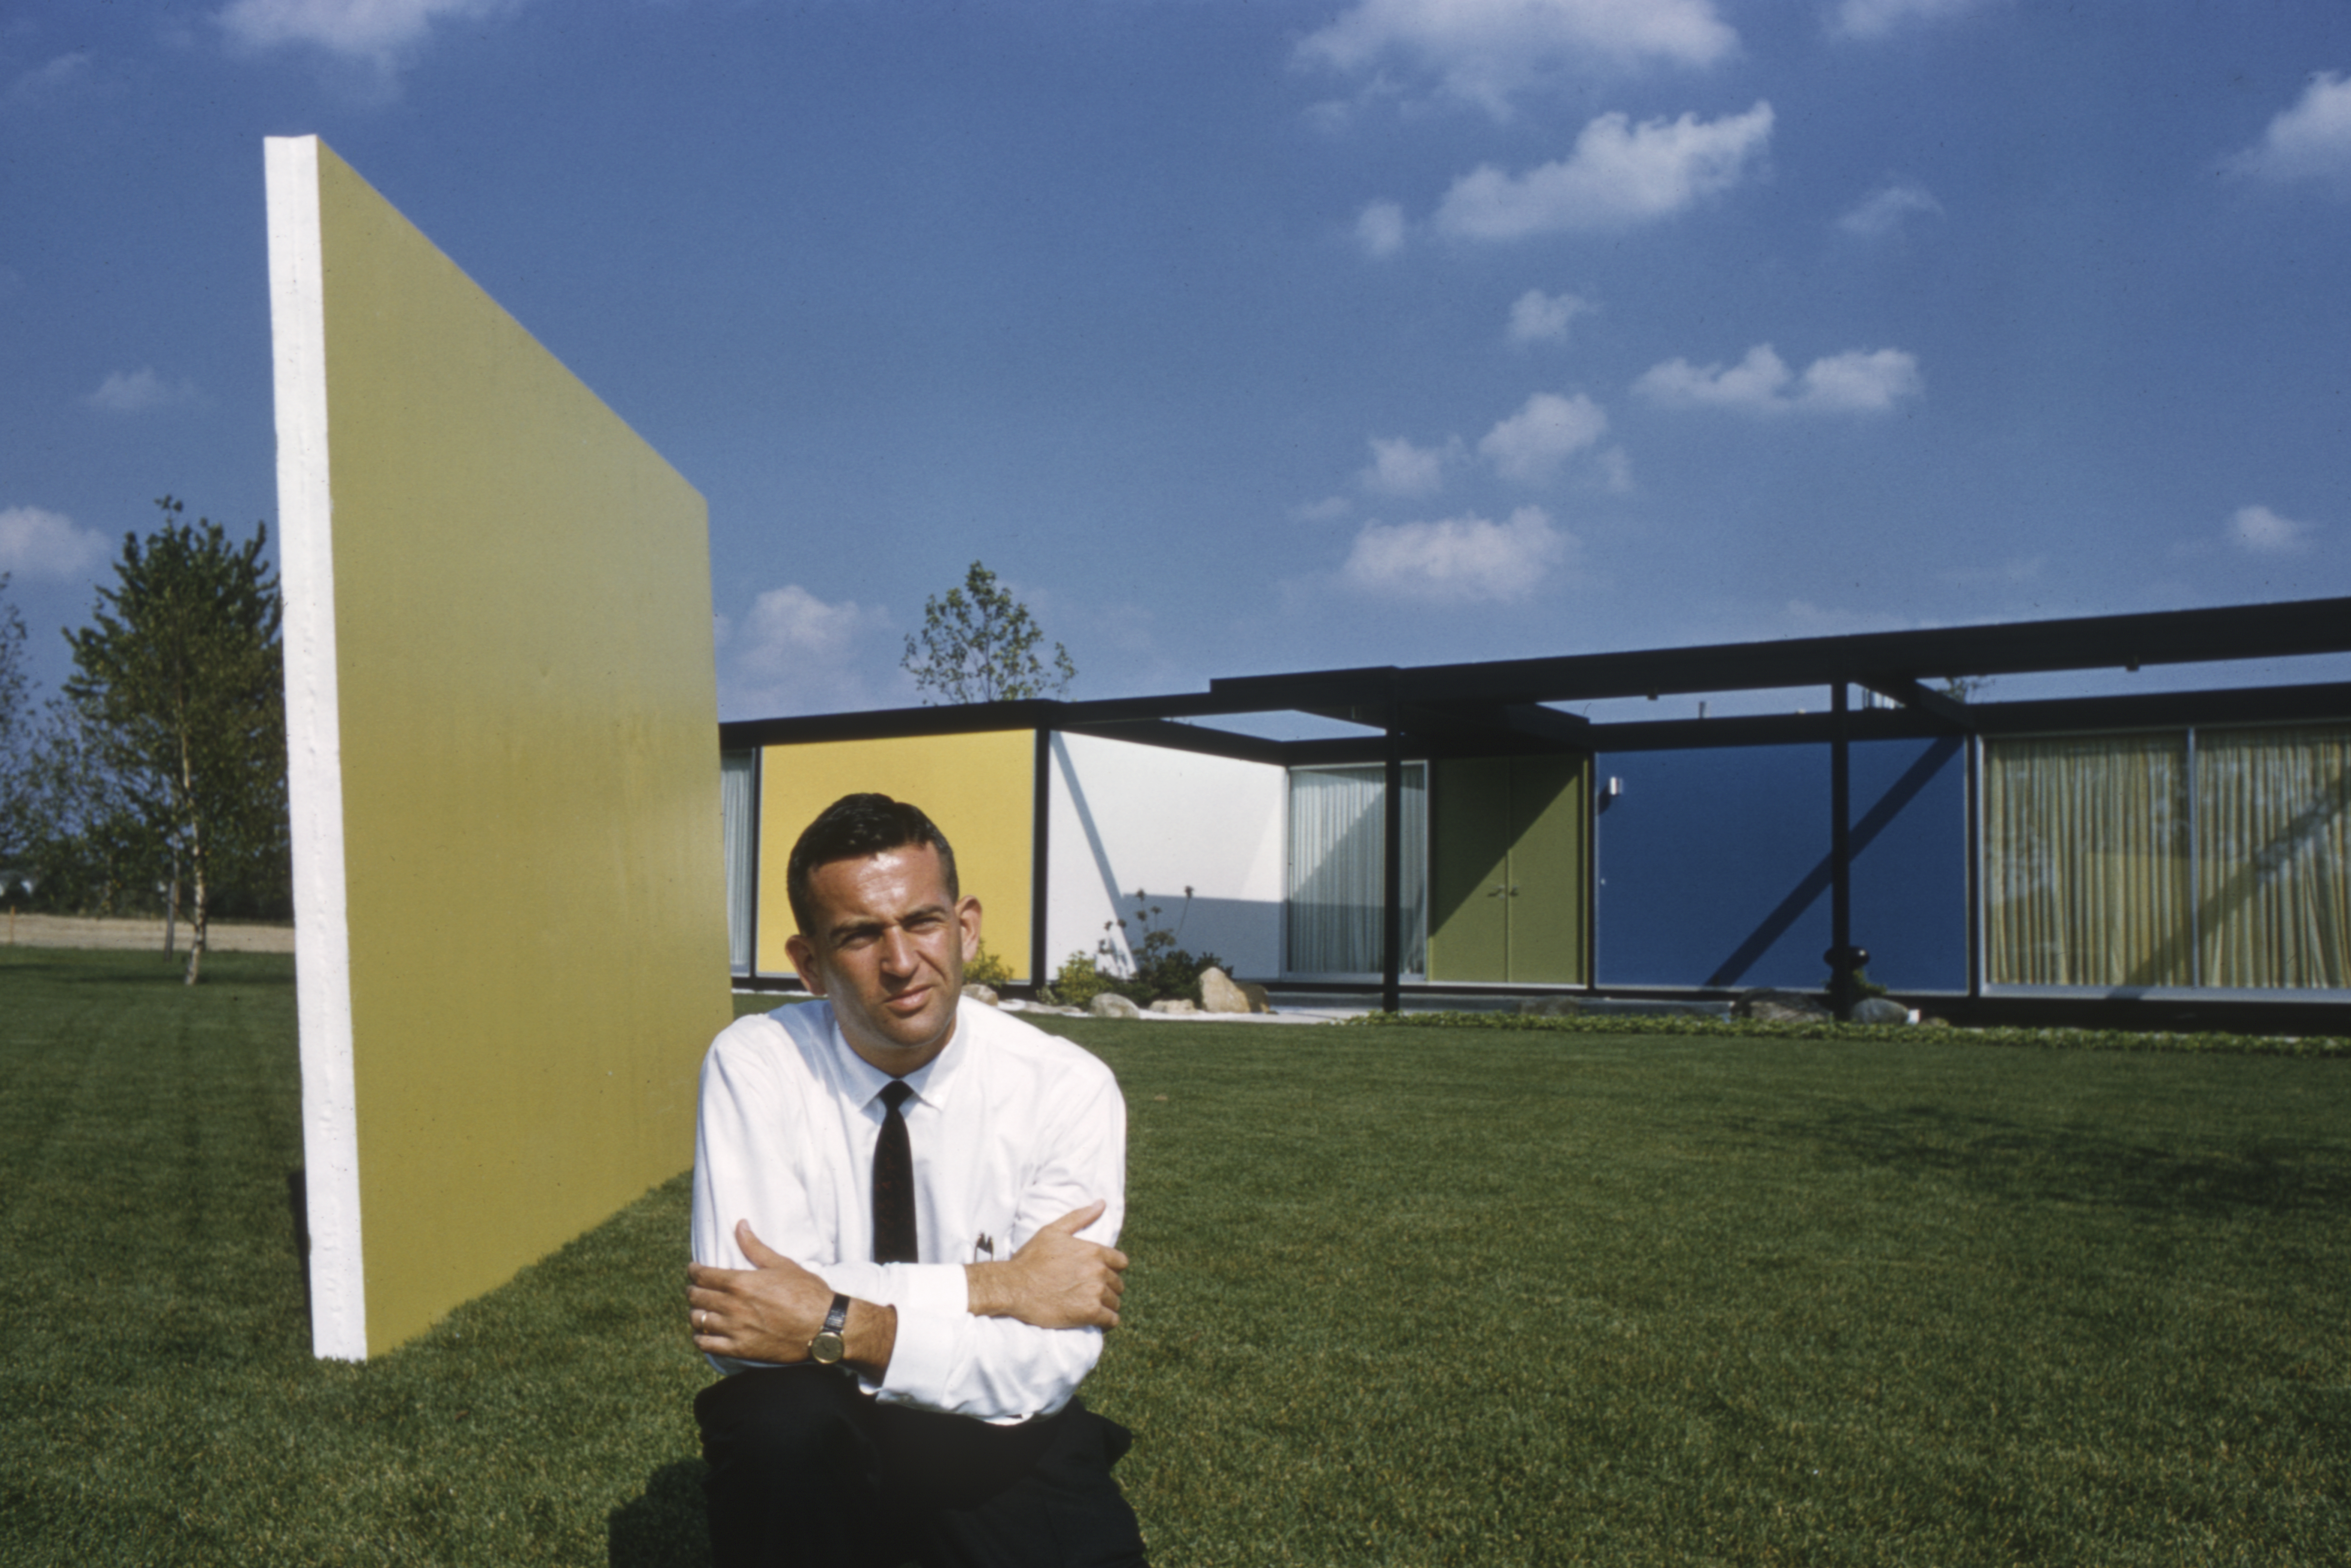 Emil tessin, at a house he designed. The date is unknown. Photograph by Phillip Harrington, for Look Magazine. 